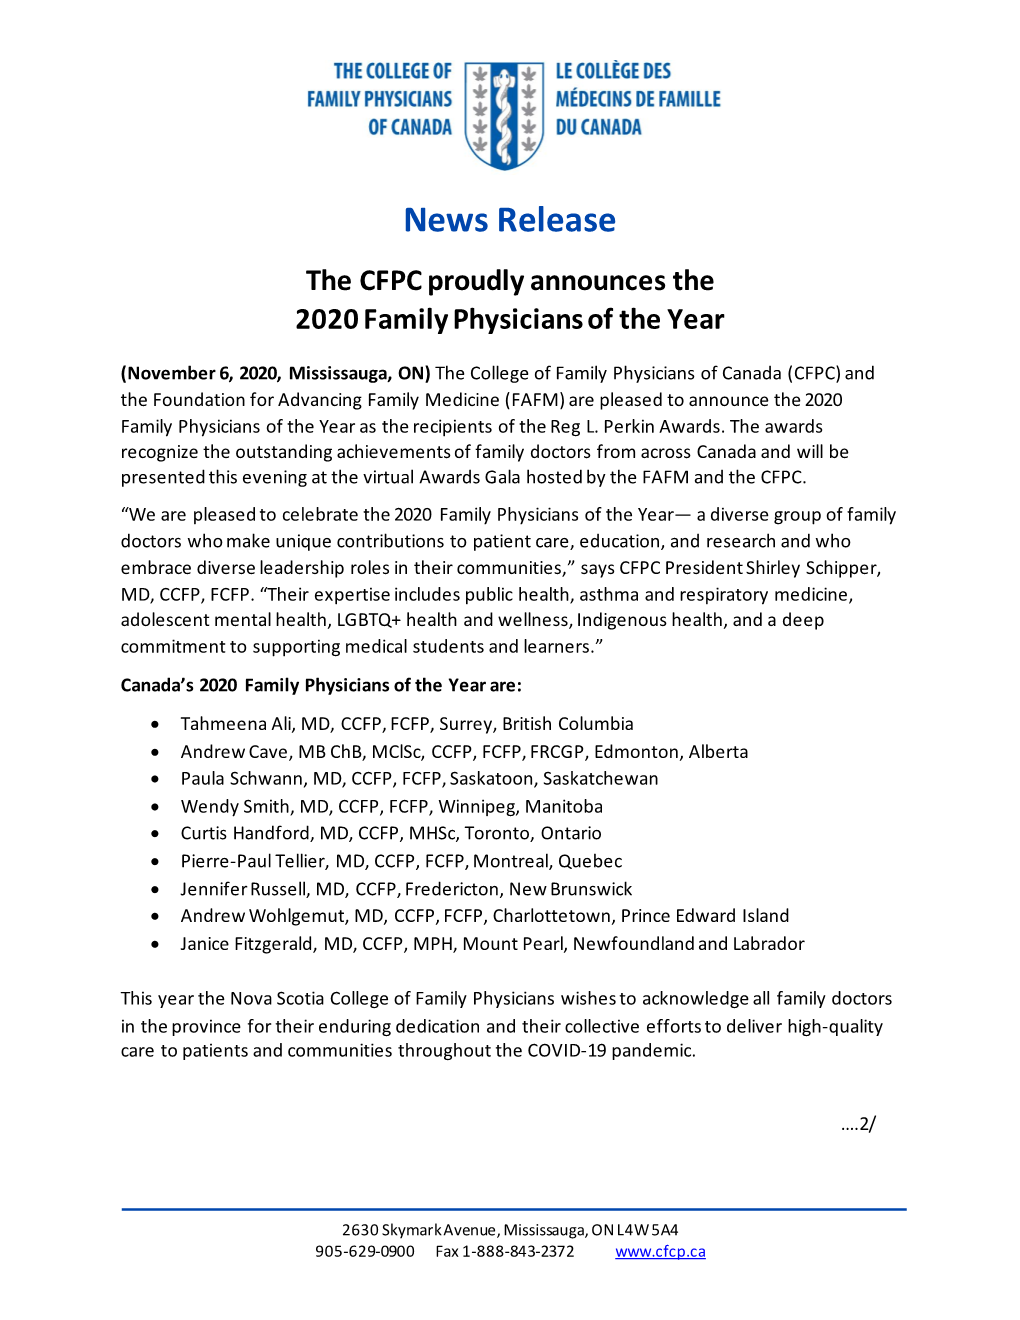 The CFPC Proudly Announces the 2020 Family Physicians of the Year